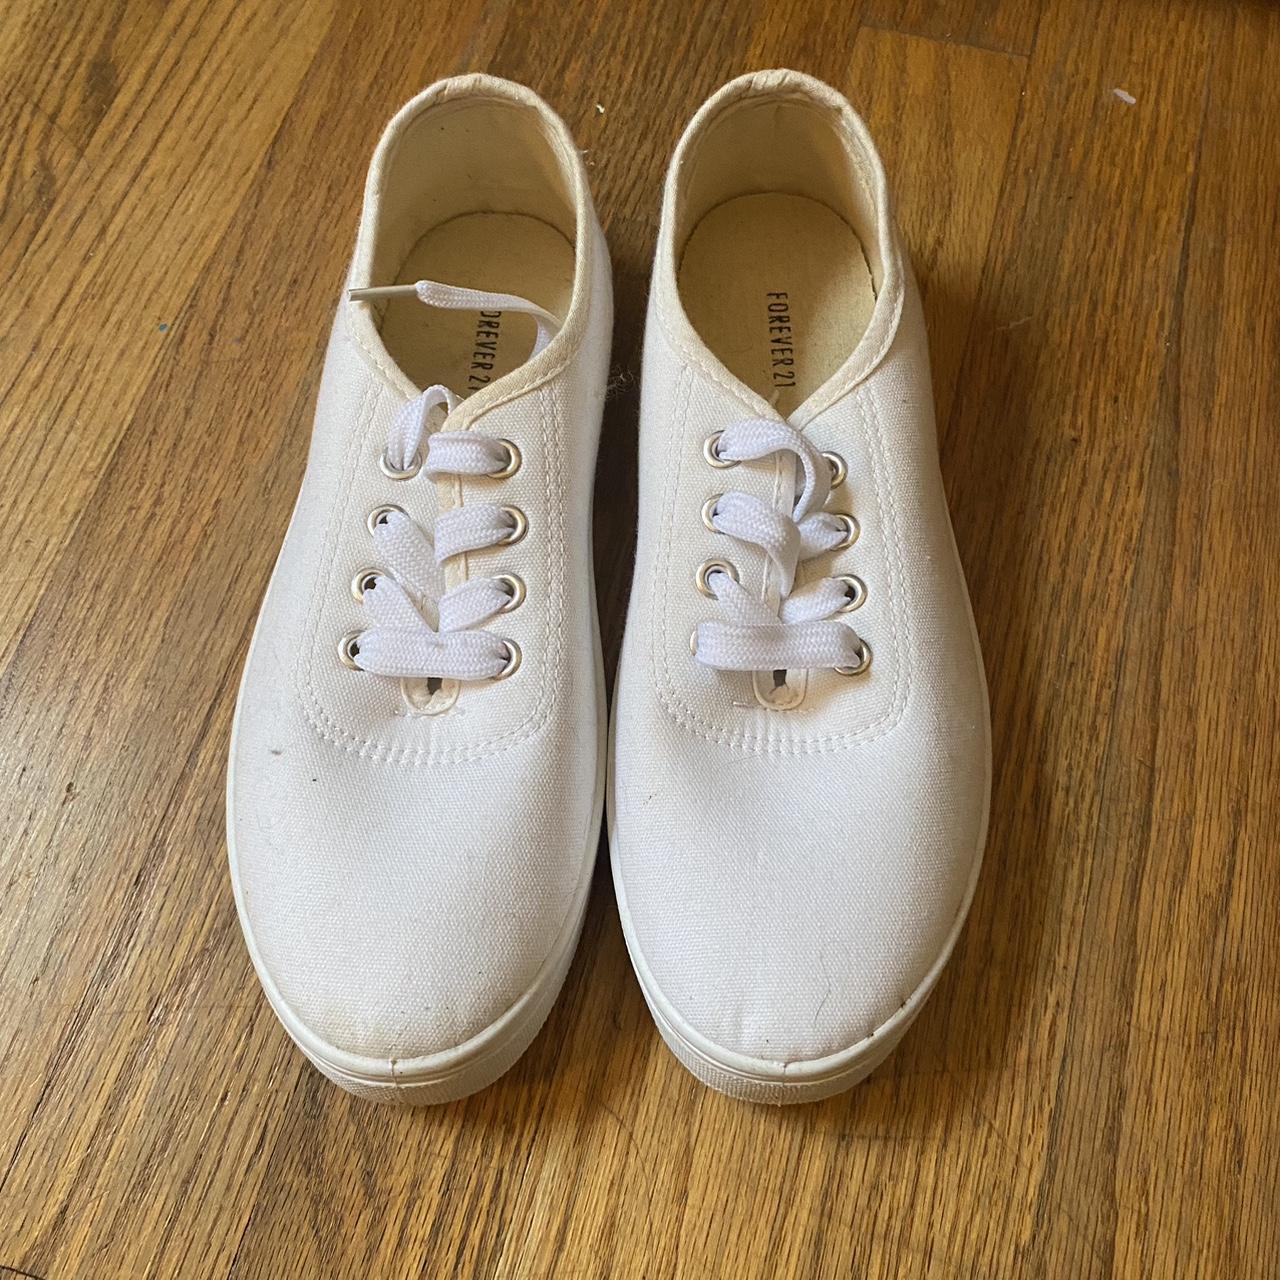 Forever 21 white tennis shoes - Depop